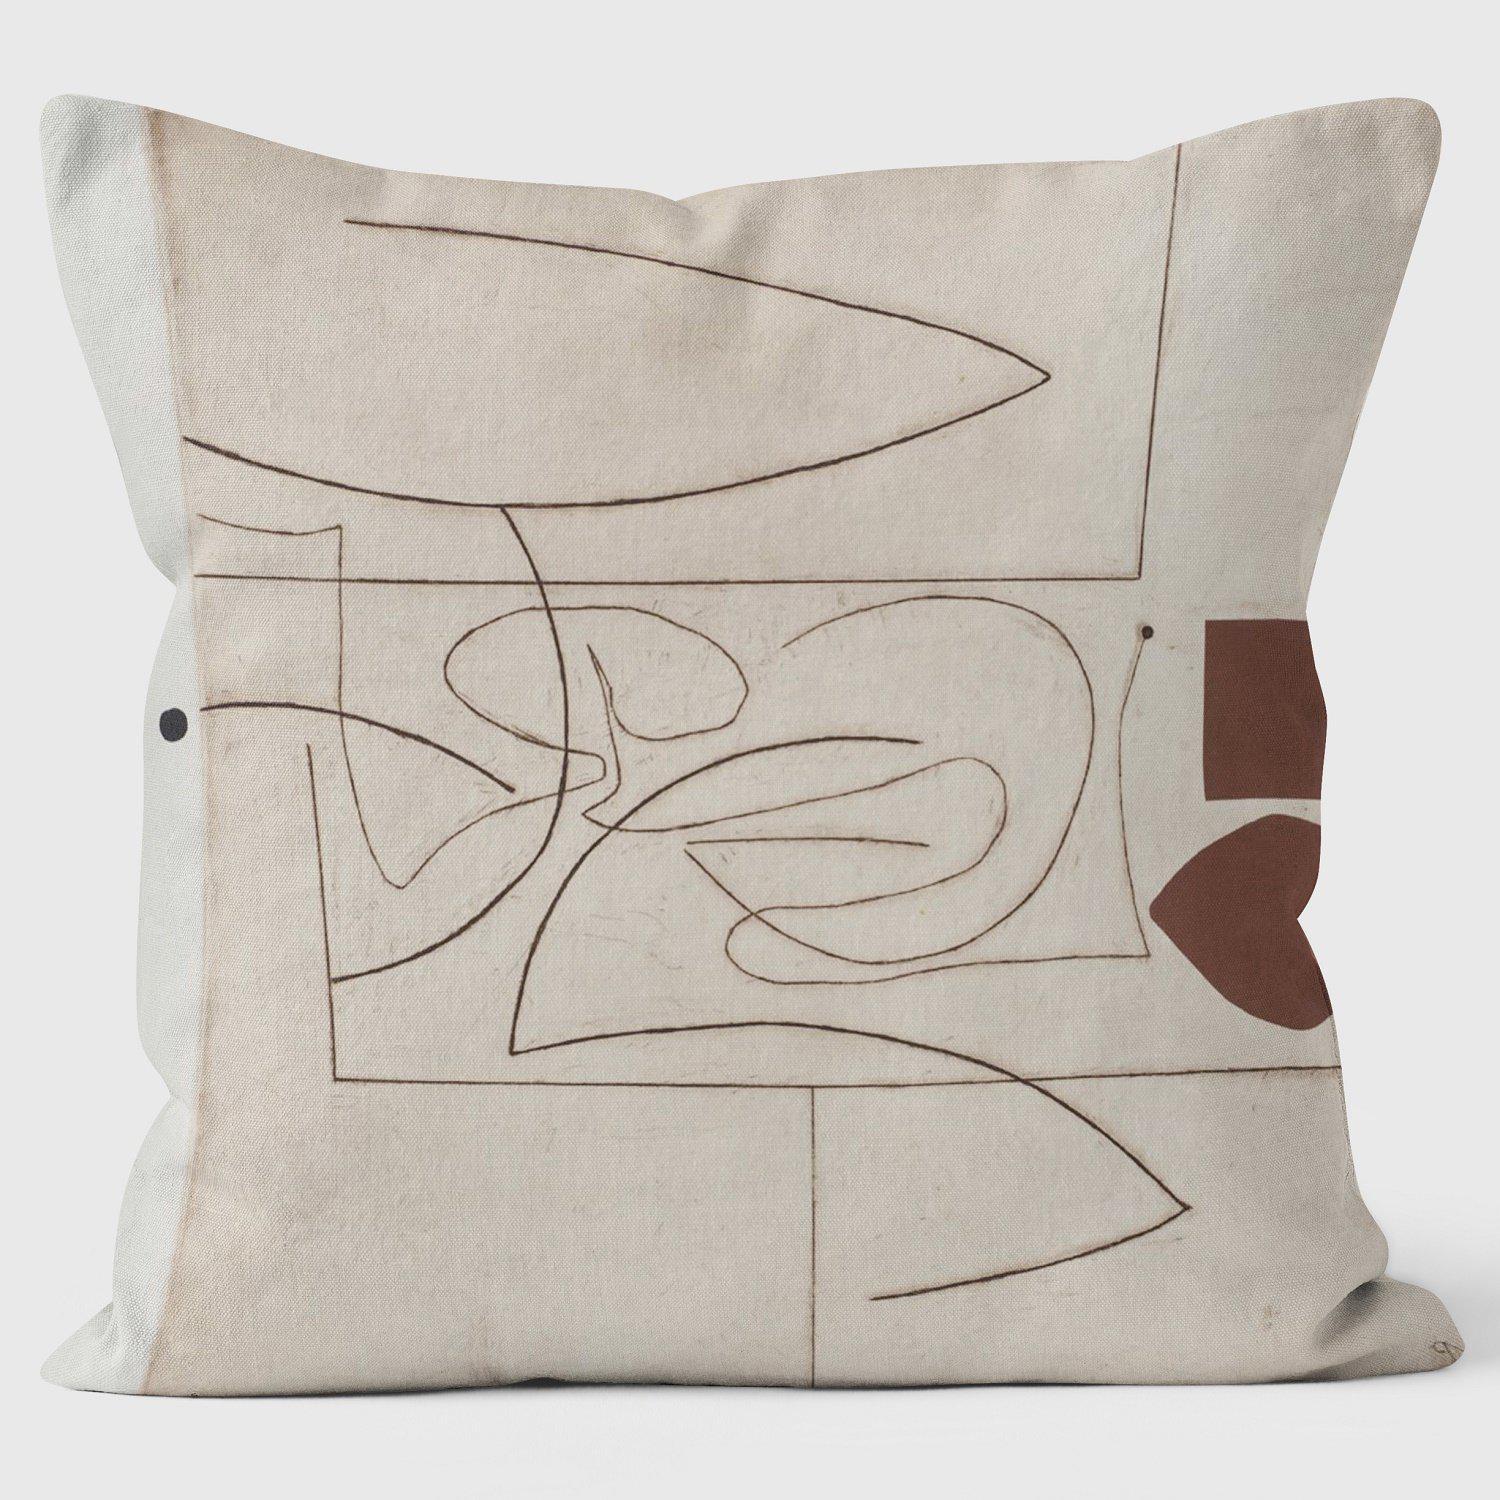 Linear Motif In Three Moviments -TATE - Victor Pasmore Cushion - Handmade Cushions UK - WeLoveCushions